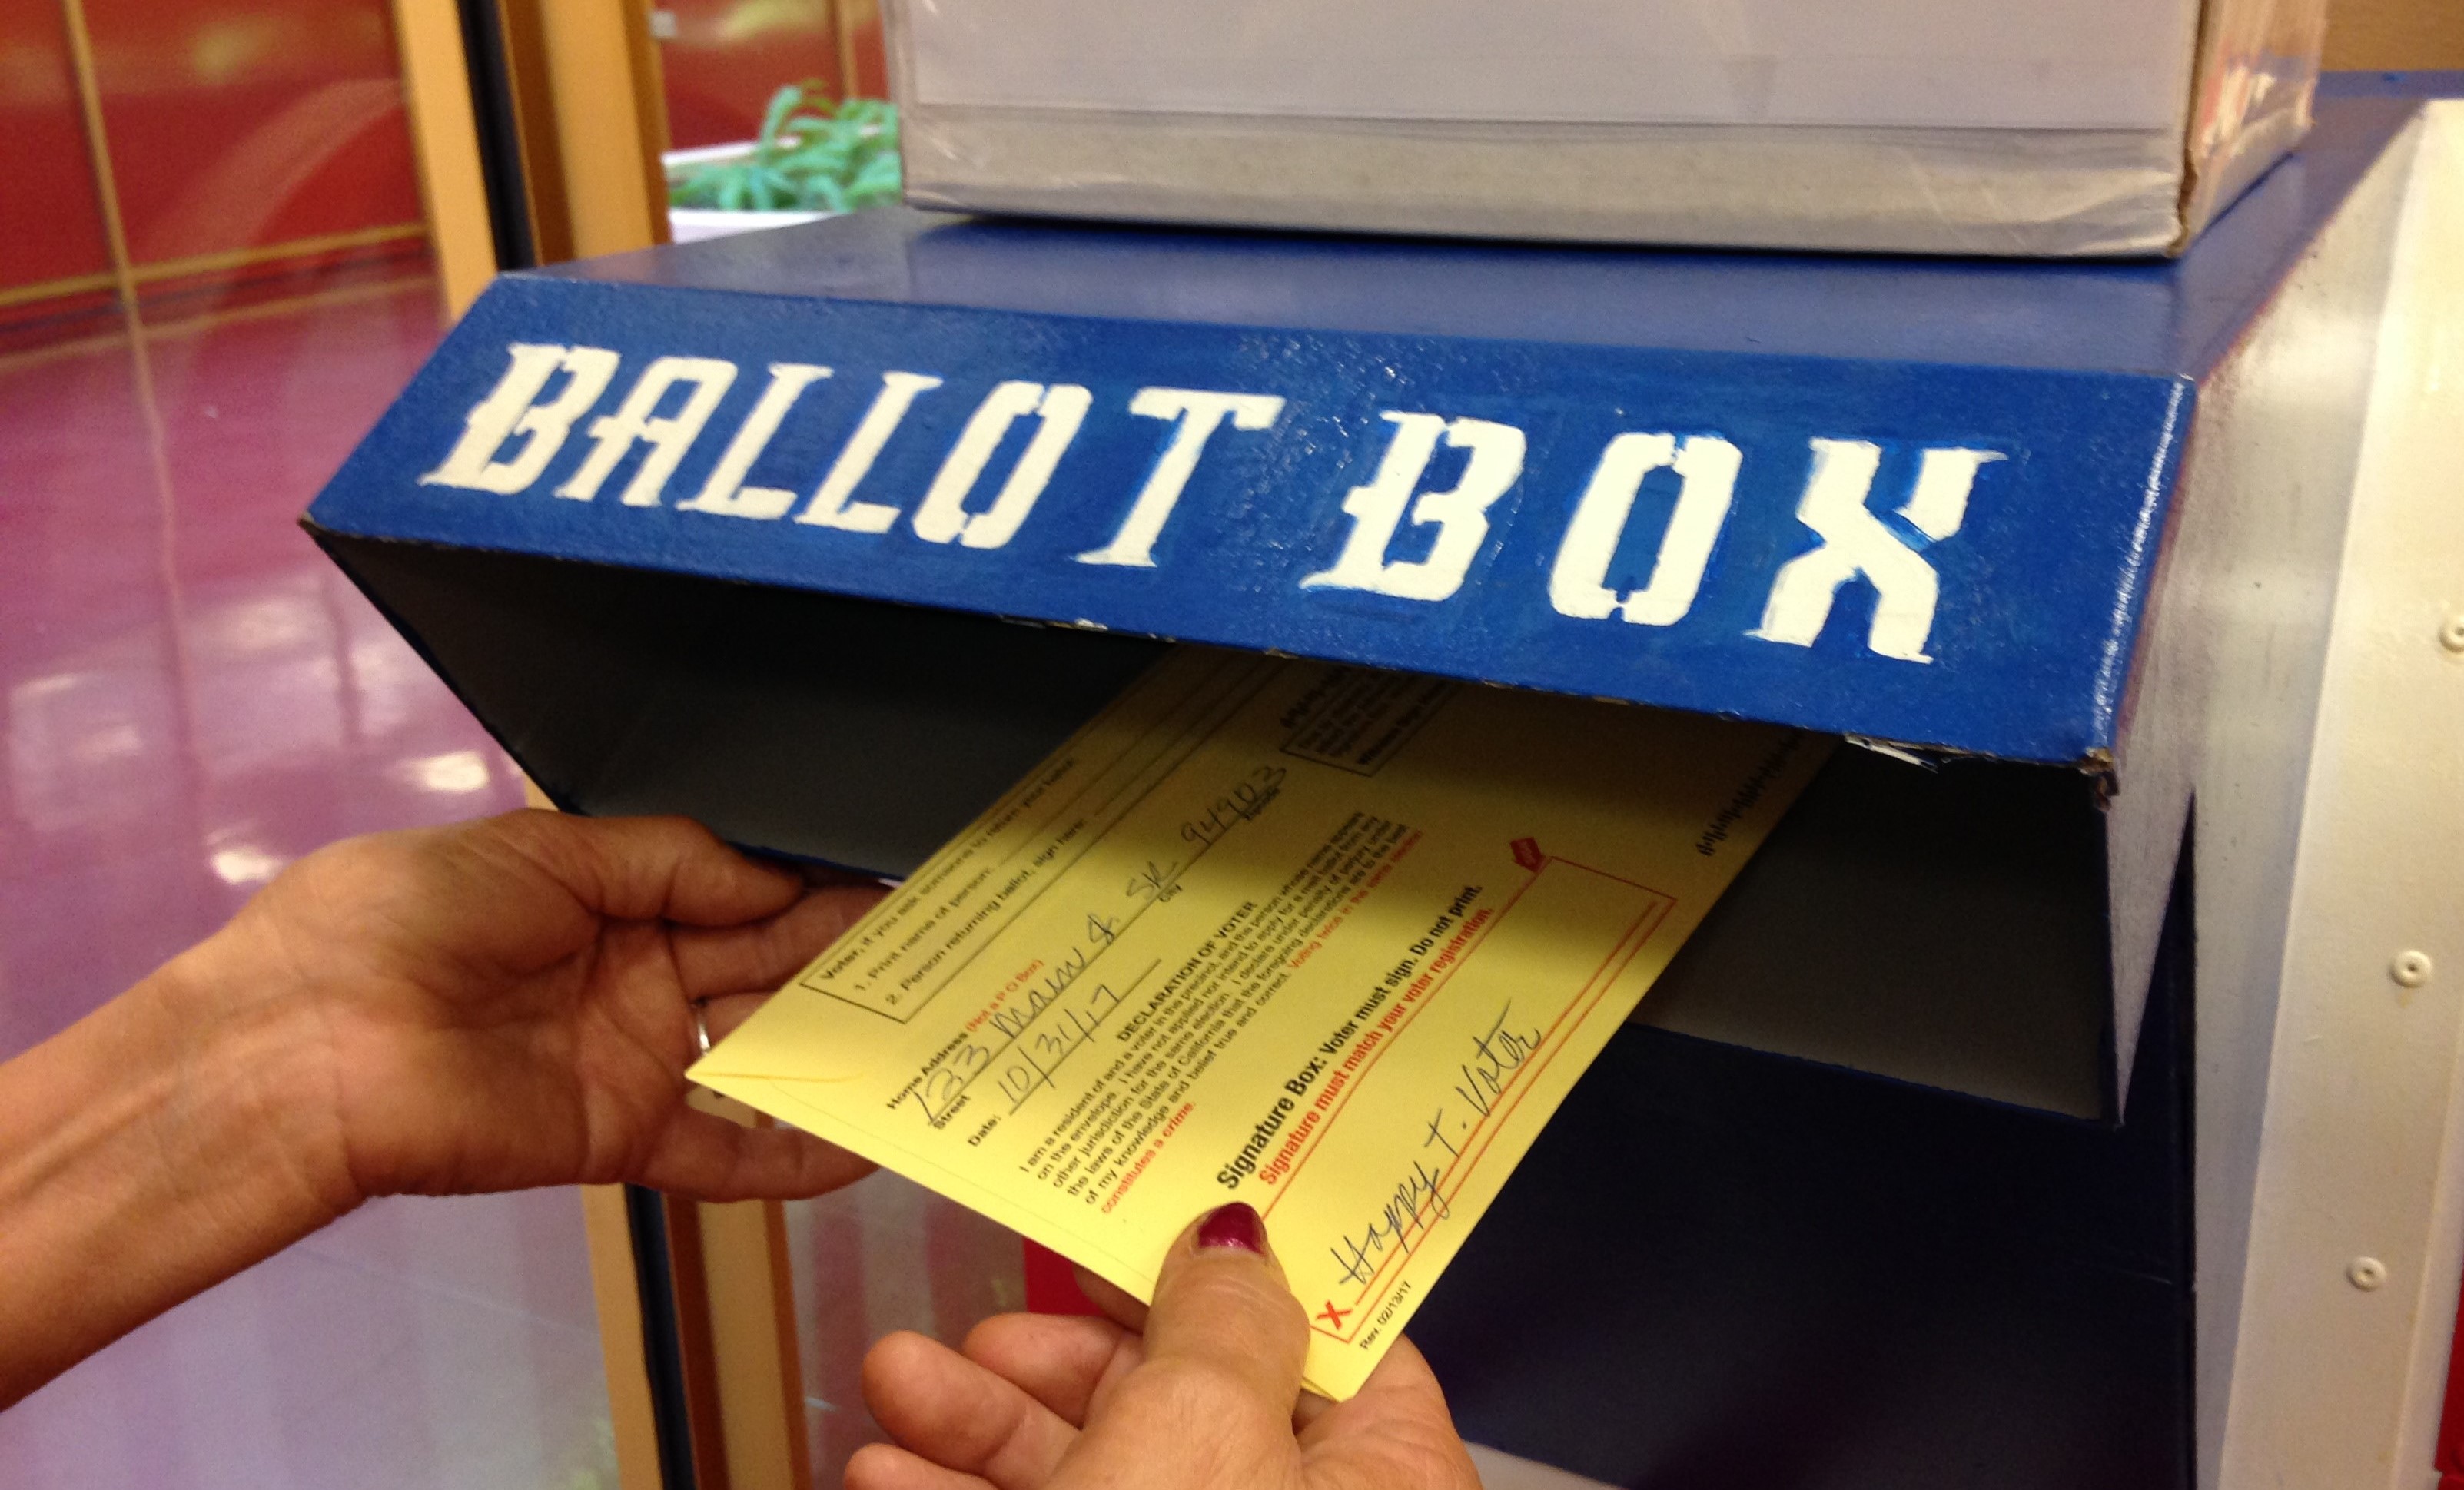 A closeup view of a person's hand dropping a ballot envelope in a Elections dropbox.